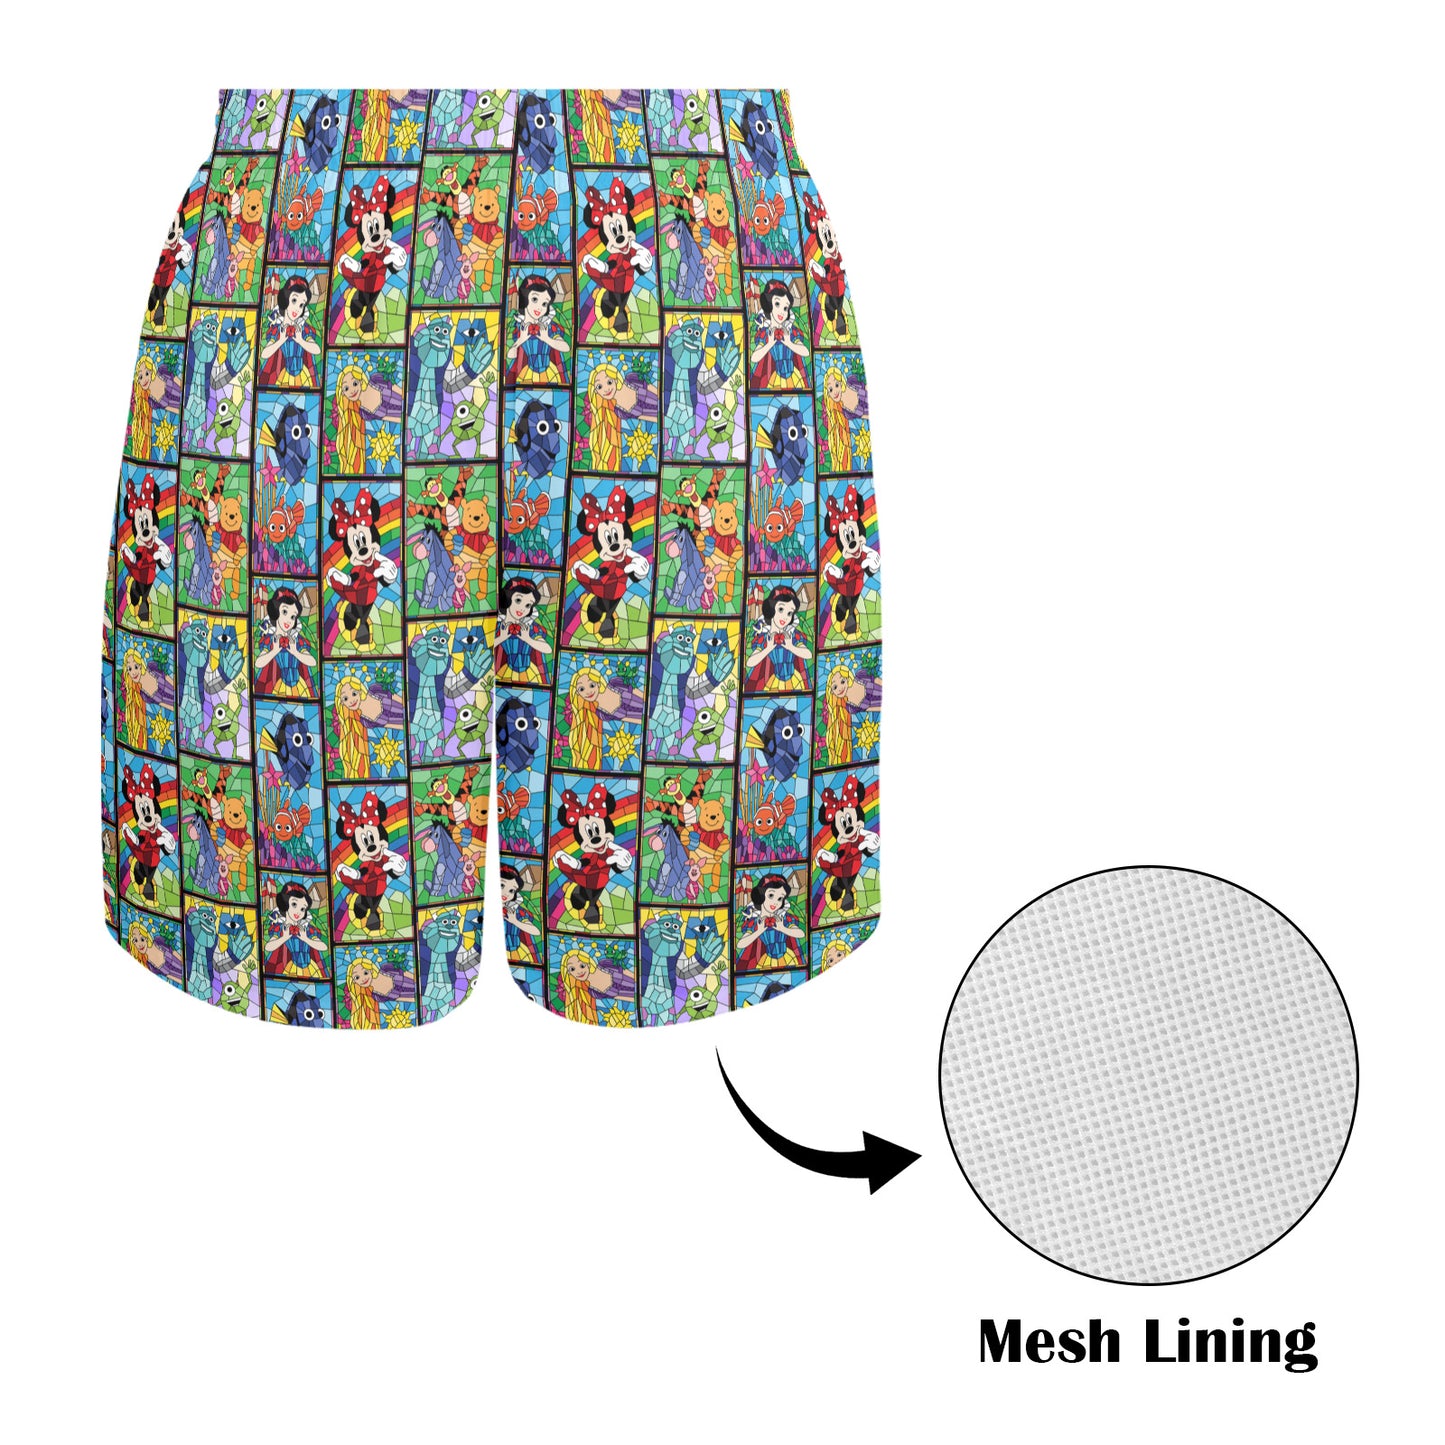 Stained Glass Characters Men's Swim Trunks Swimsuit